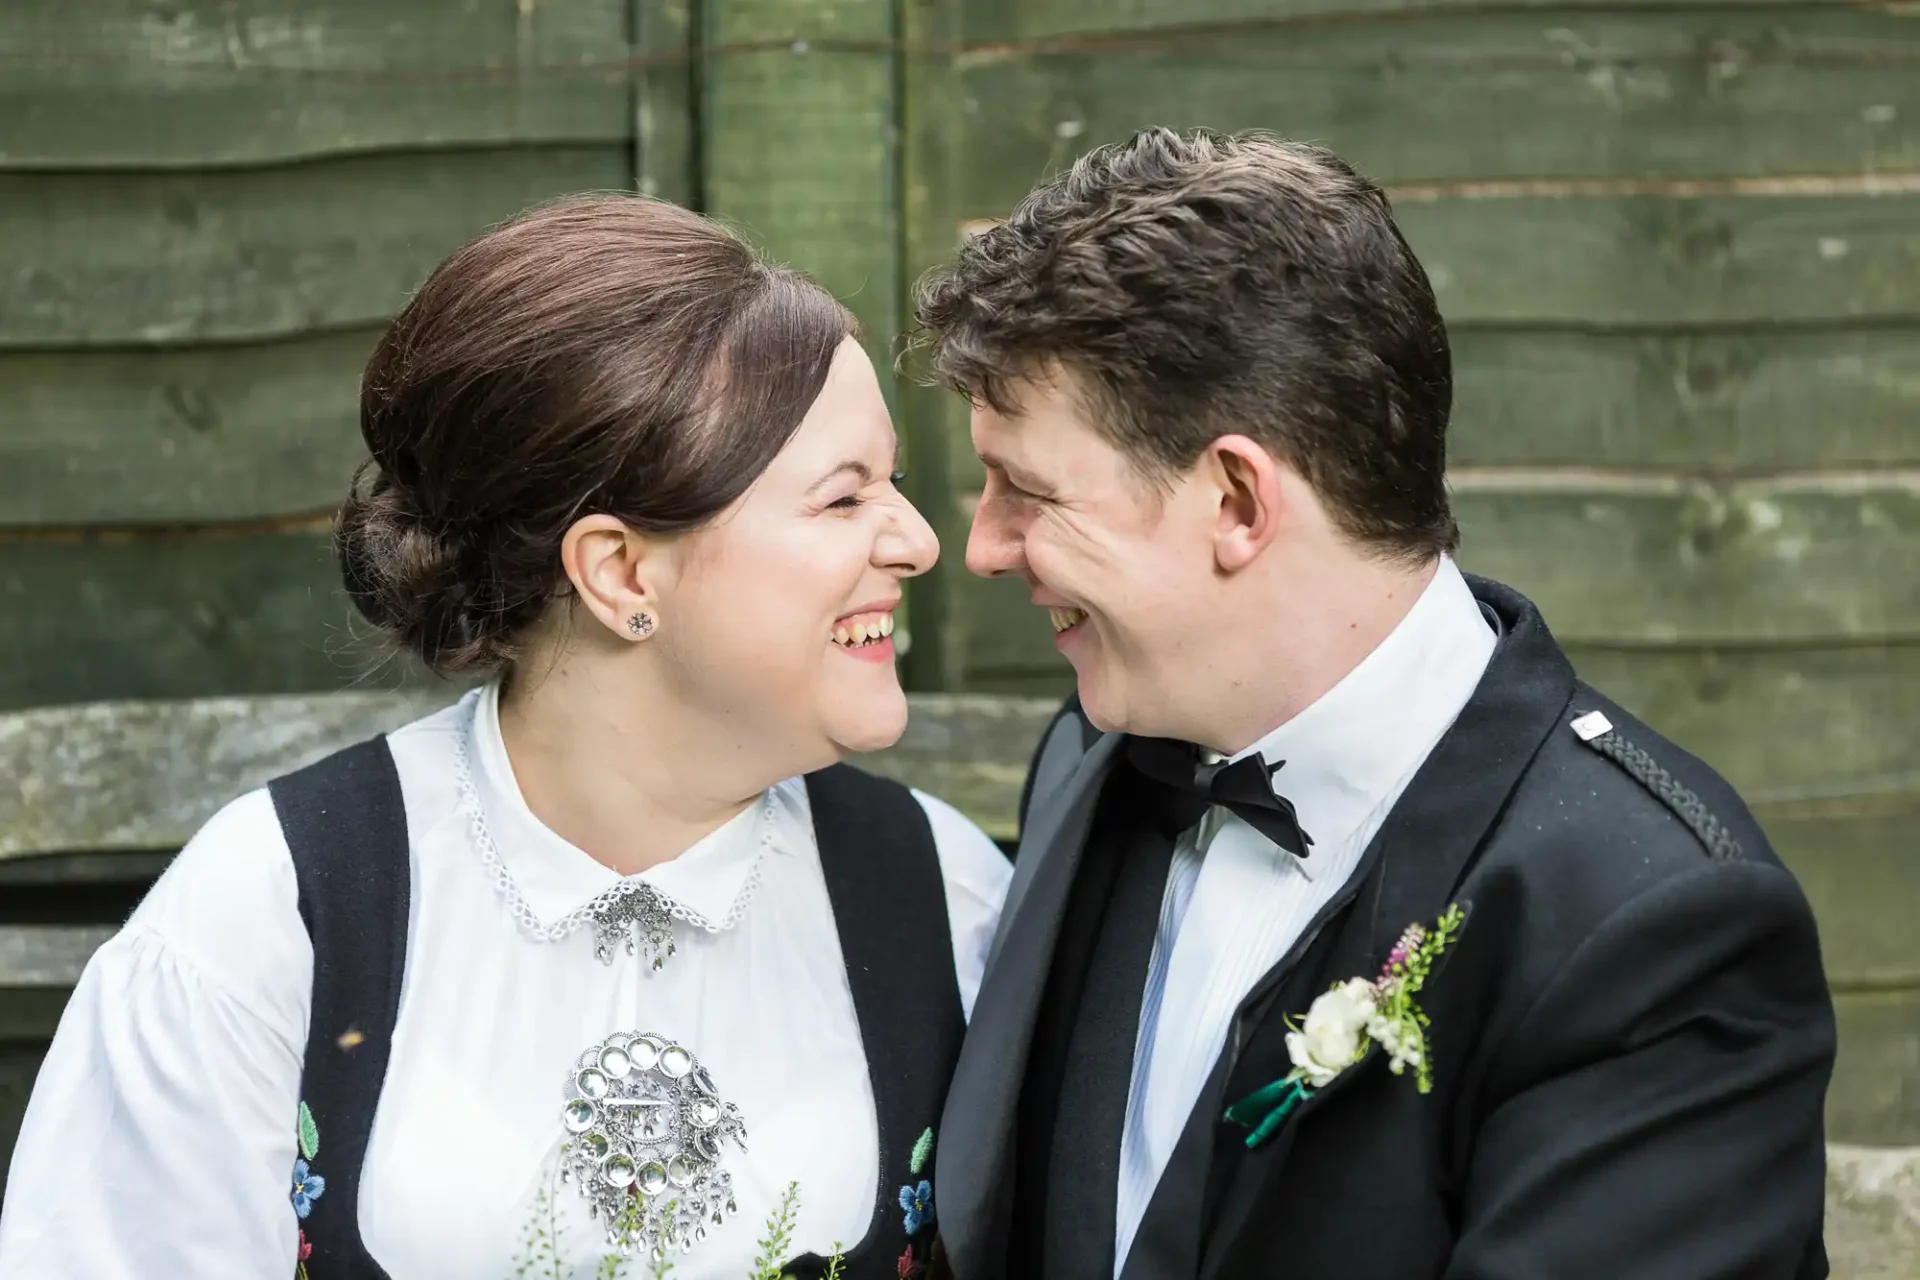 A joyful couple in traditional and formal attire smiling at each other with a wooden backdrop.